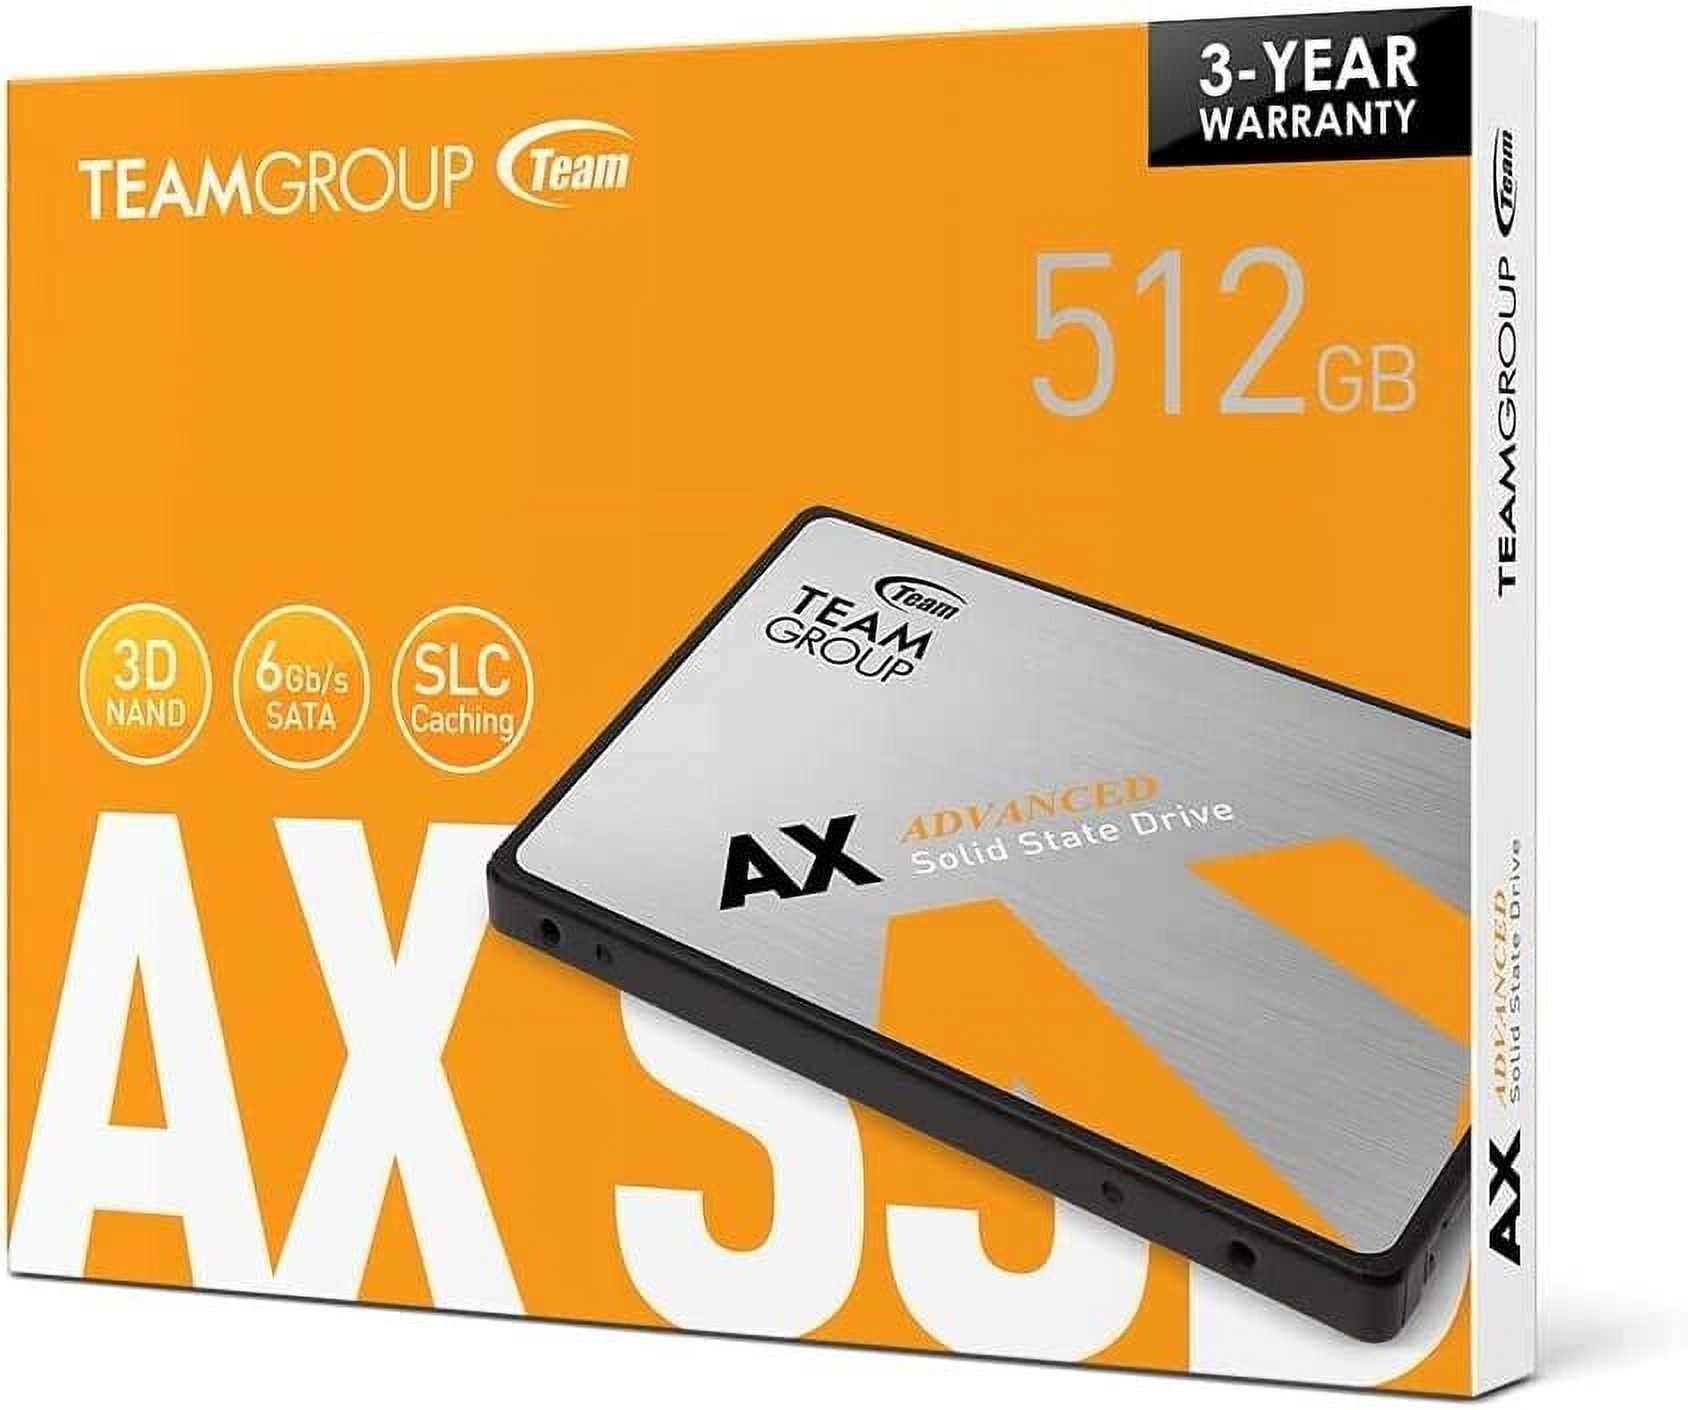 TEAMGROUP AX2 512GB 3D NAND TLC 2.5 Inch SATA III Internal Solid State Drive SSD (Read Speed up to 540 MB/s) Compatible with Laptop & PC Desktop T253A3512G0C101 - image 2 of 2